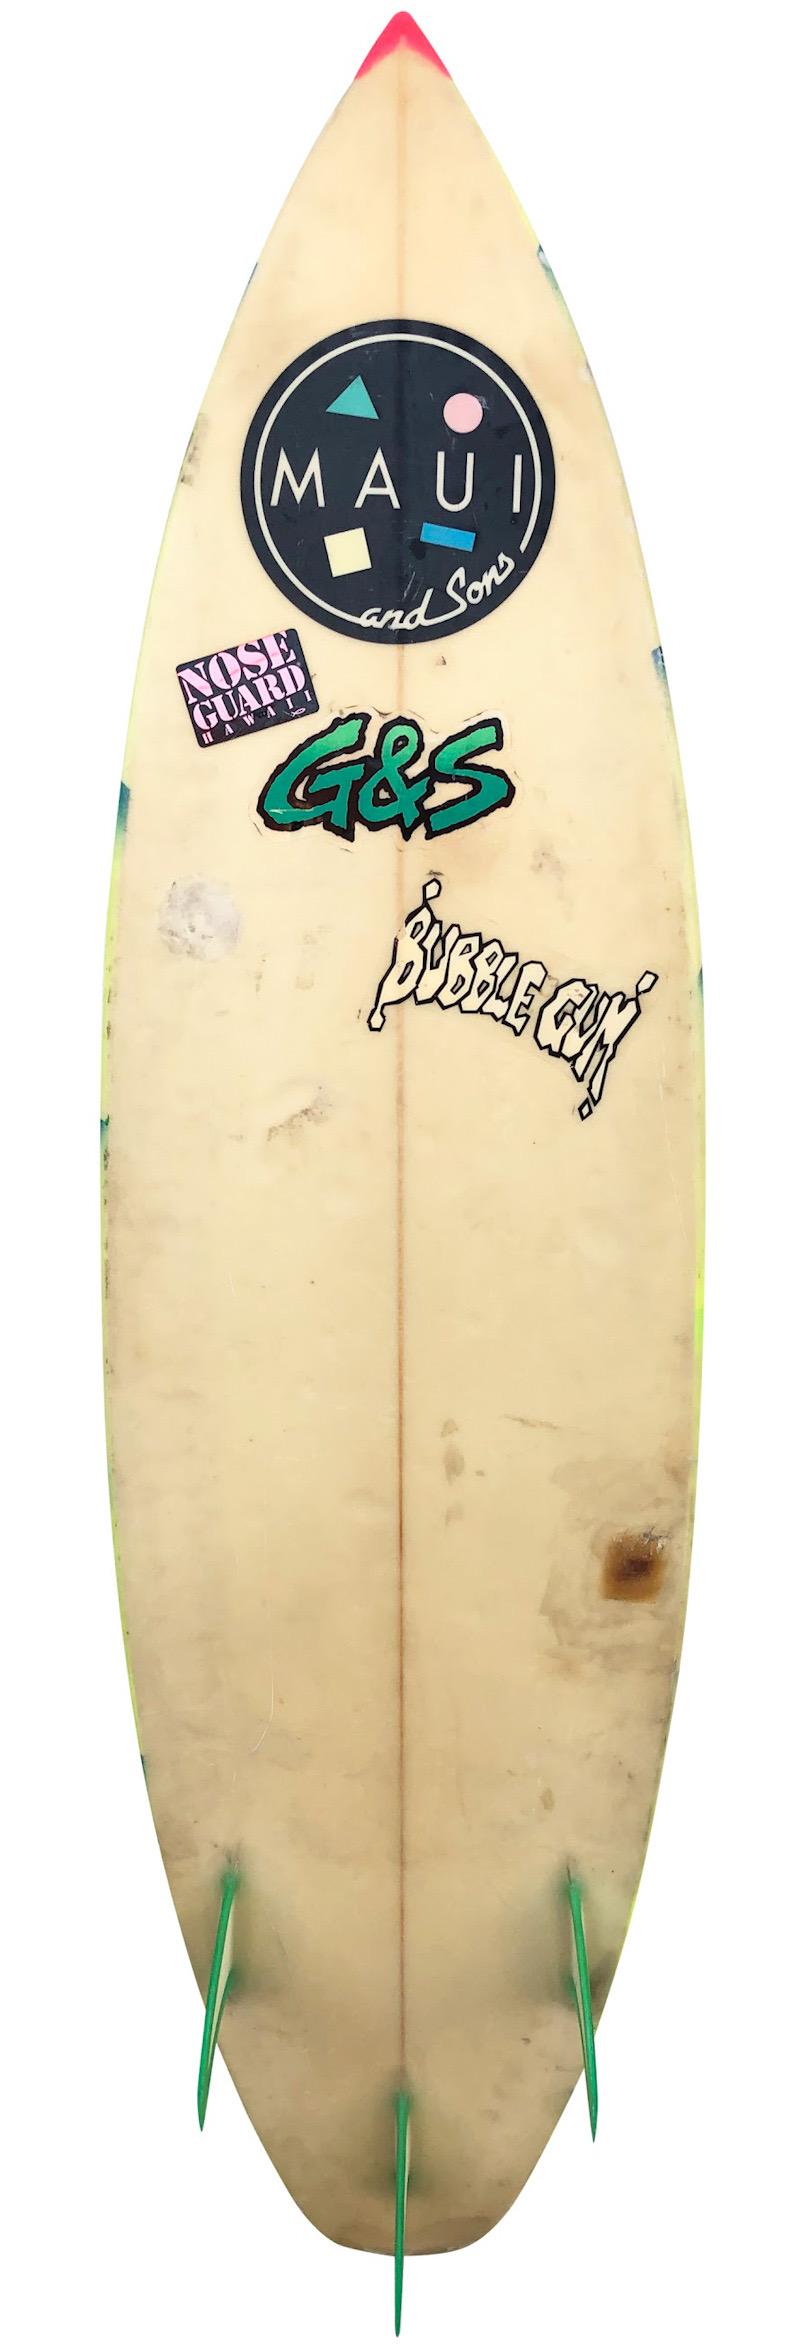 Early 1980s Maui & Sons shortboard surfboard. Features an amazing airbrush design indicative of the 1980s. Complemented by matching glassed on thruster (tri-fin) setup. An incredible example of a colorful 80s surfboard made by the iconic Maui and